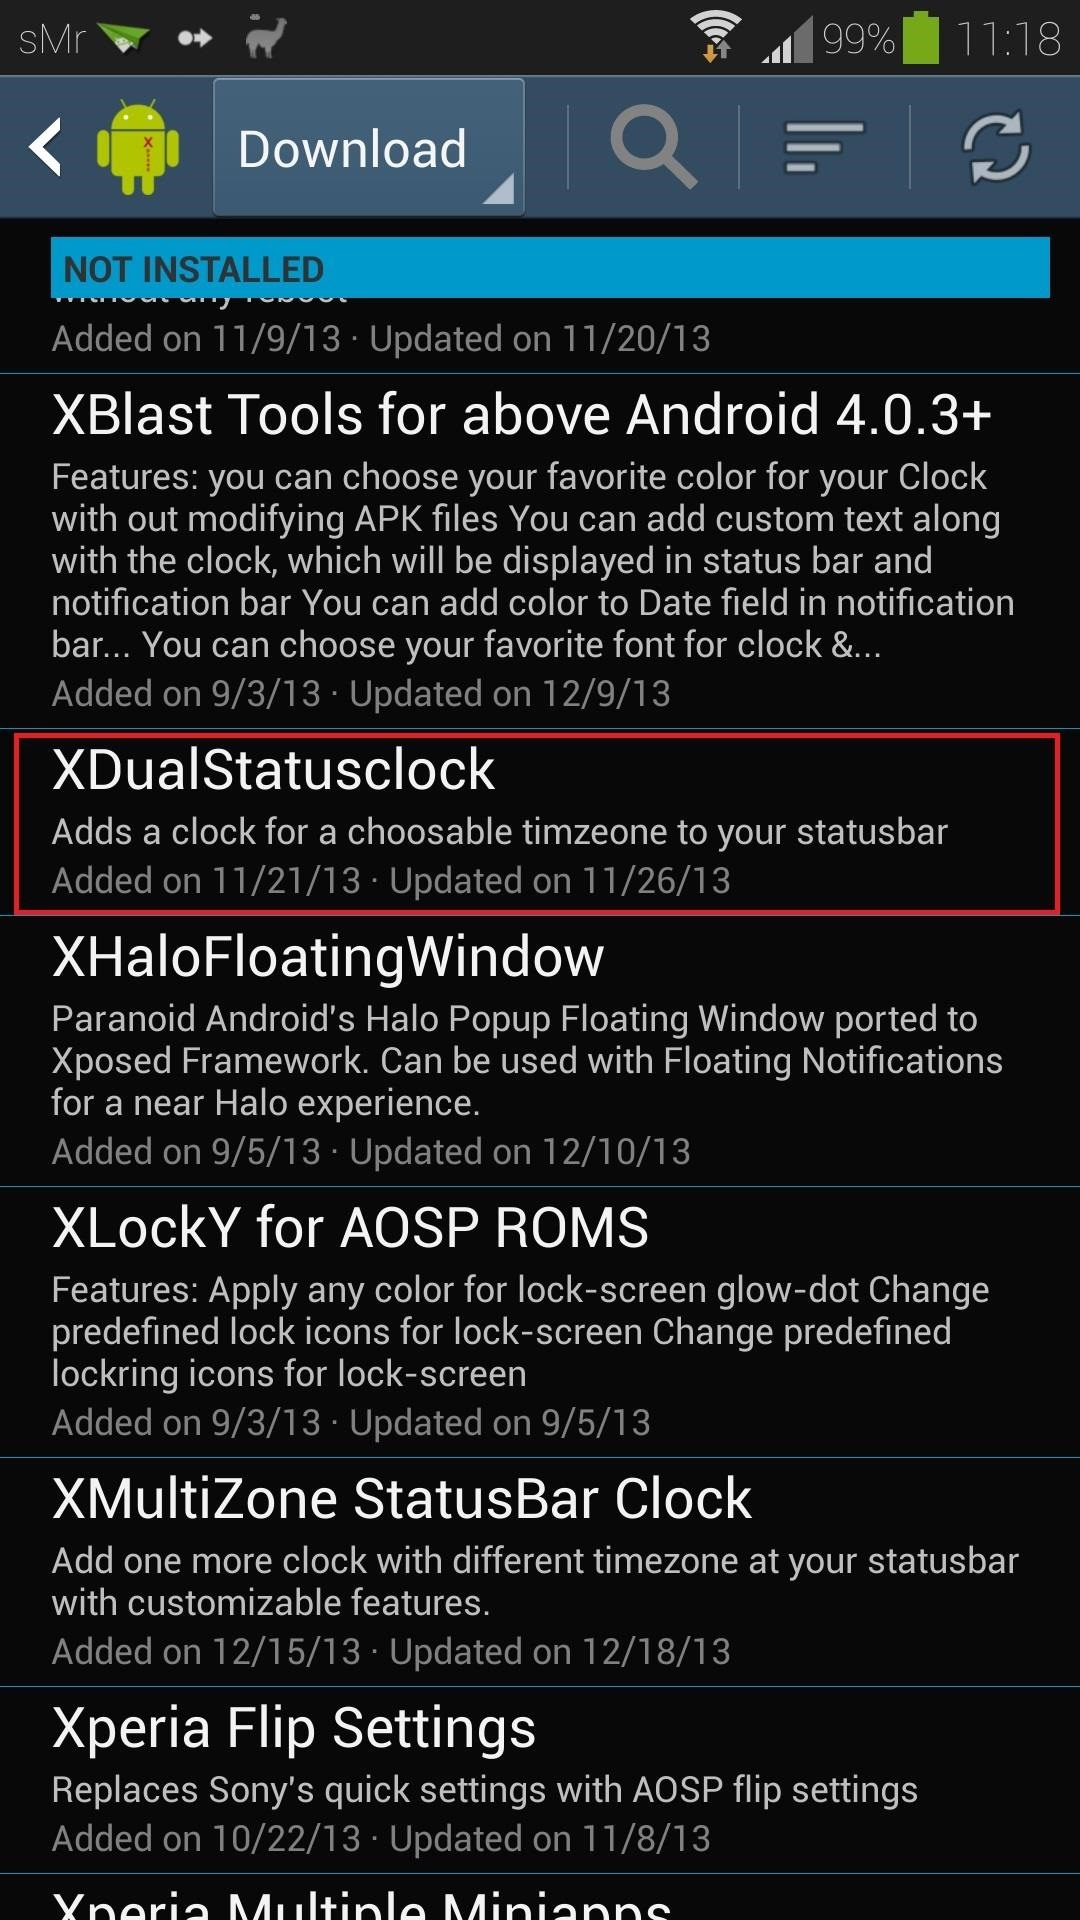 How to Get Dual Clocks for Different Time Zones on Your Samsung Galaxy S4's Status Bar